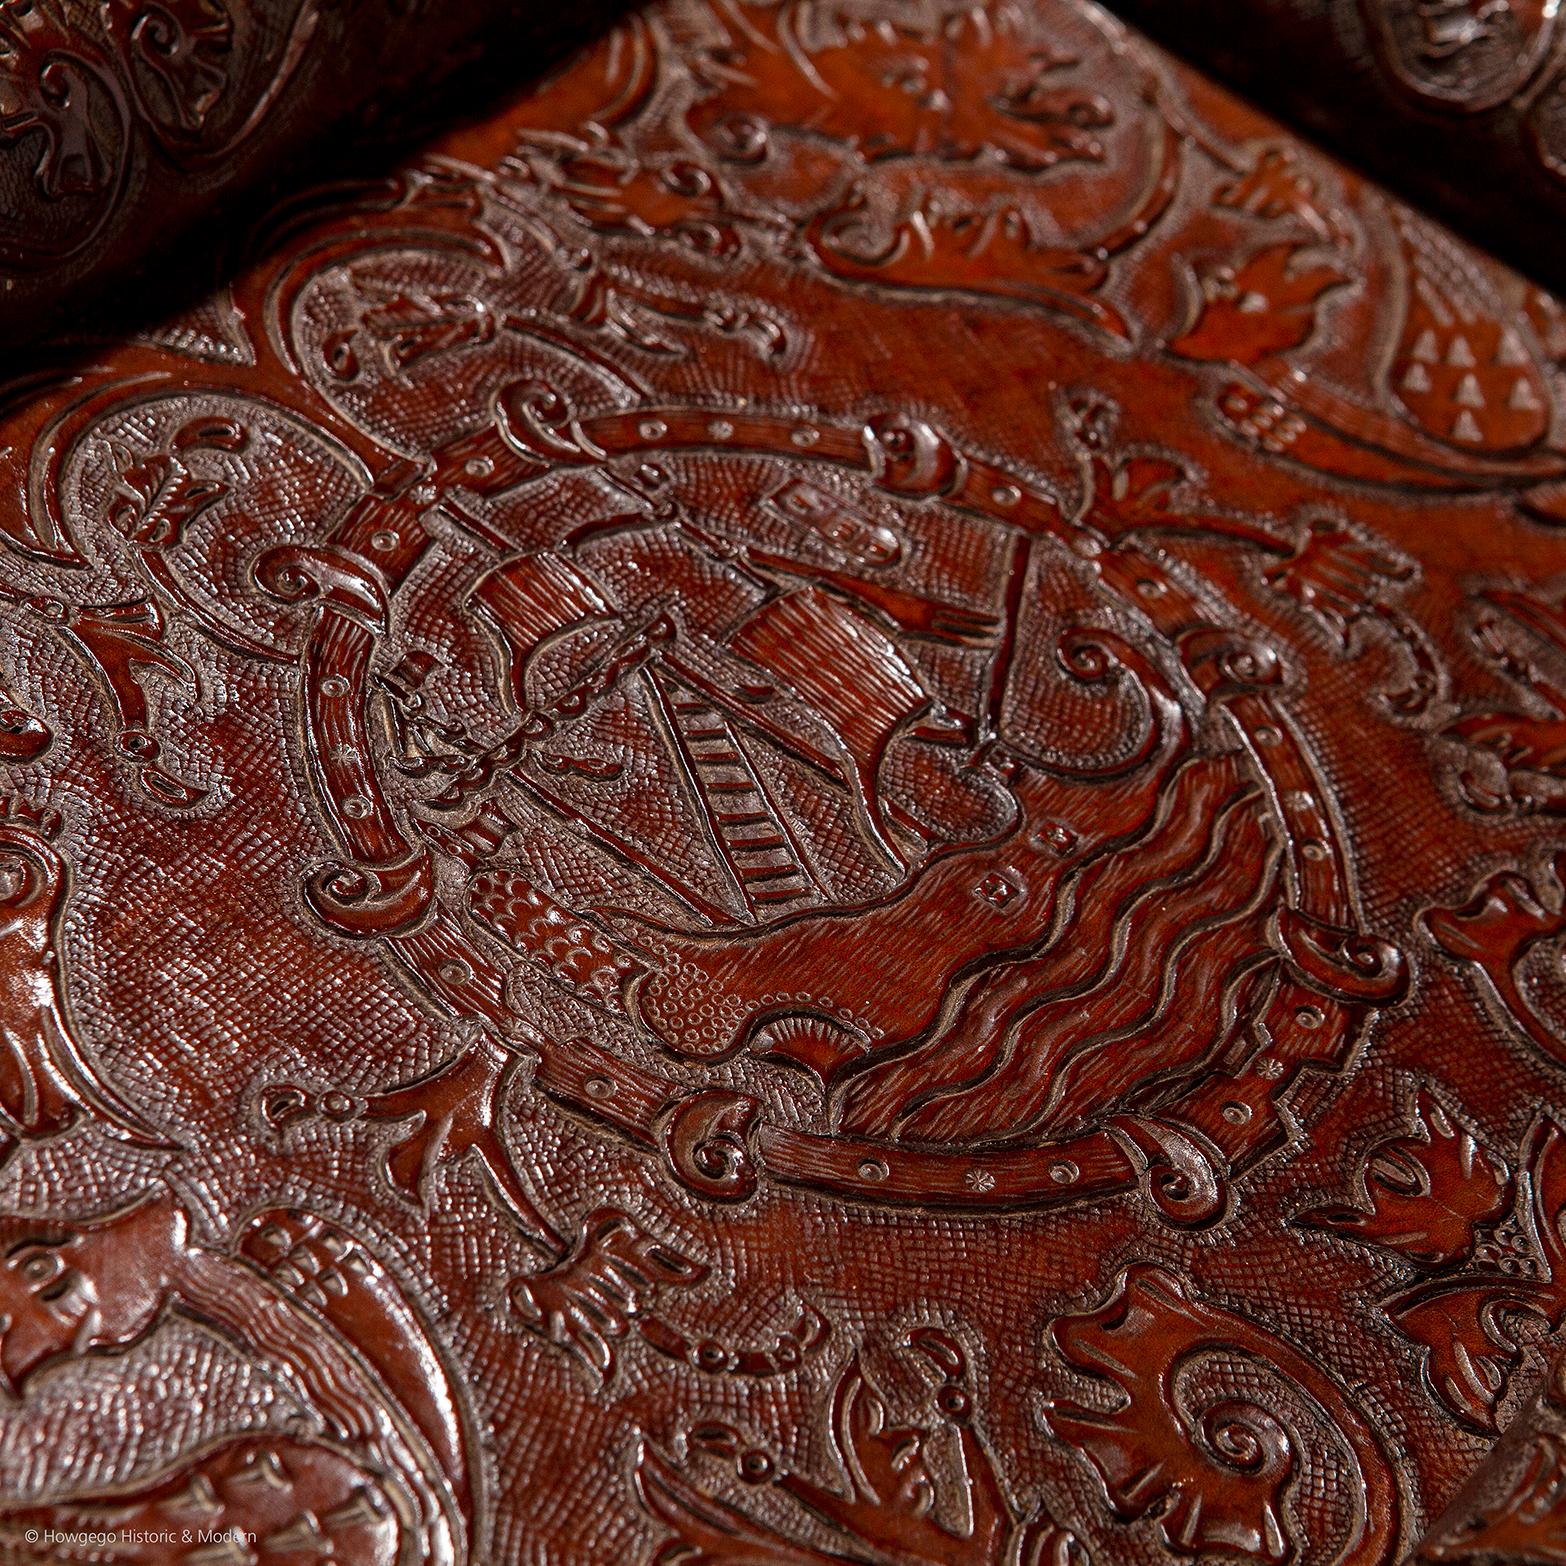 - Very unusual Baroque Revival leather tray of nautical interest
- Characteristic Baroque design featuring a sailing galleon surrounded by mythical birds, tulips, acanthus and oak leaves
- Beautifully worked in deep relief
- In excellent original